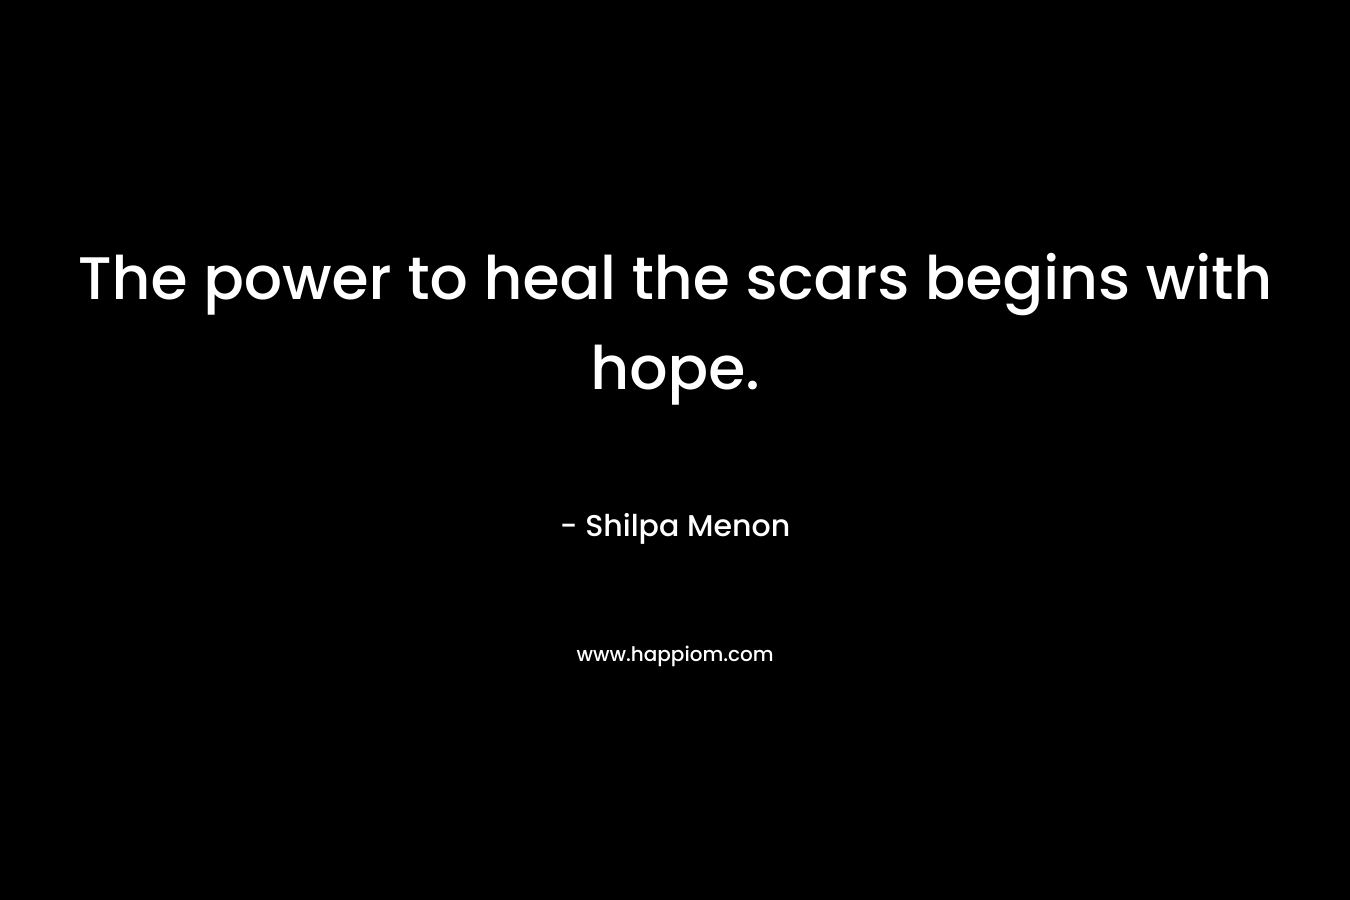 The power to heal the scars begins with hope.